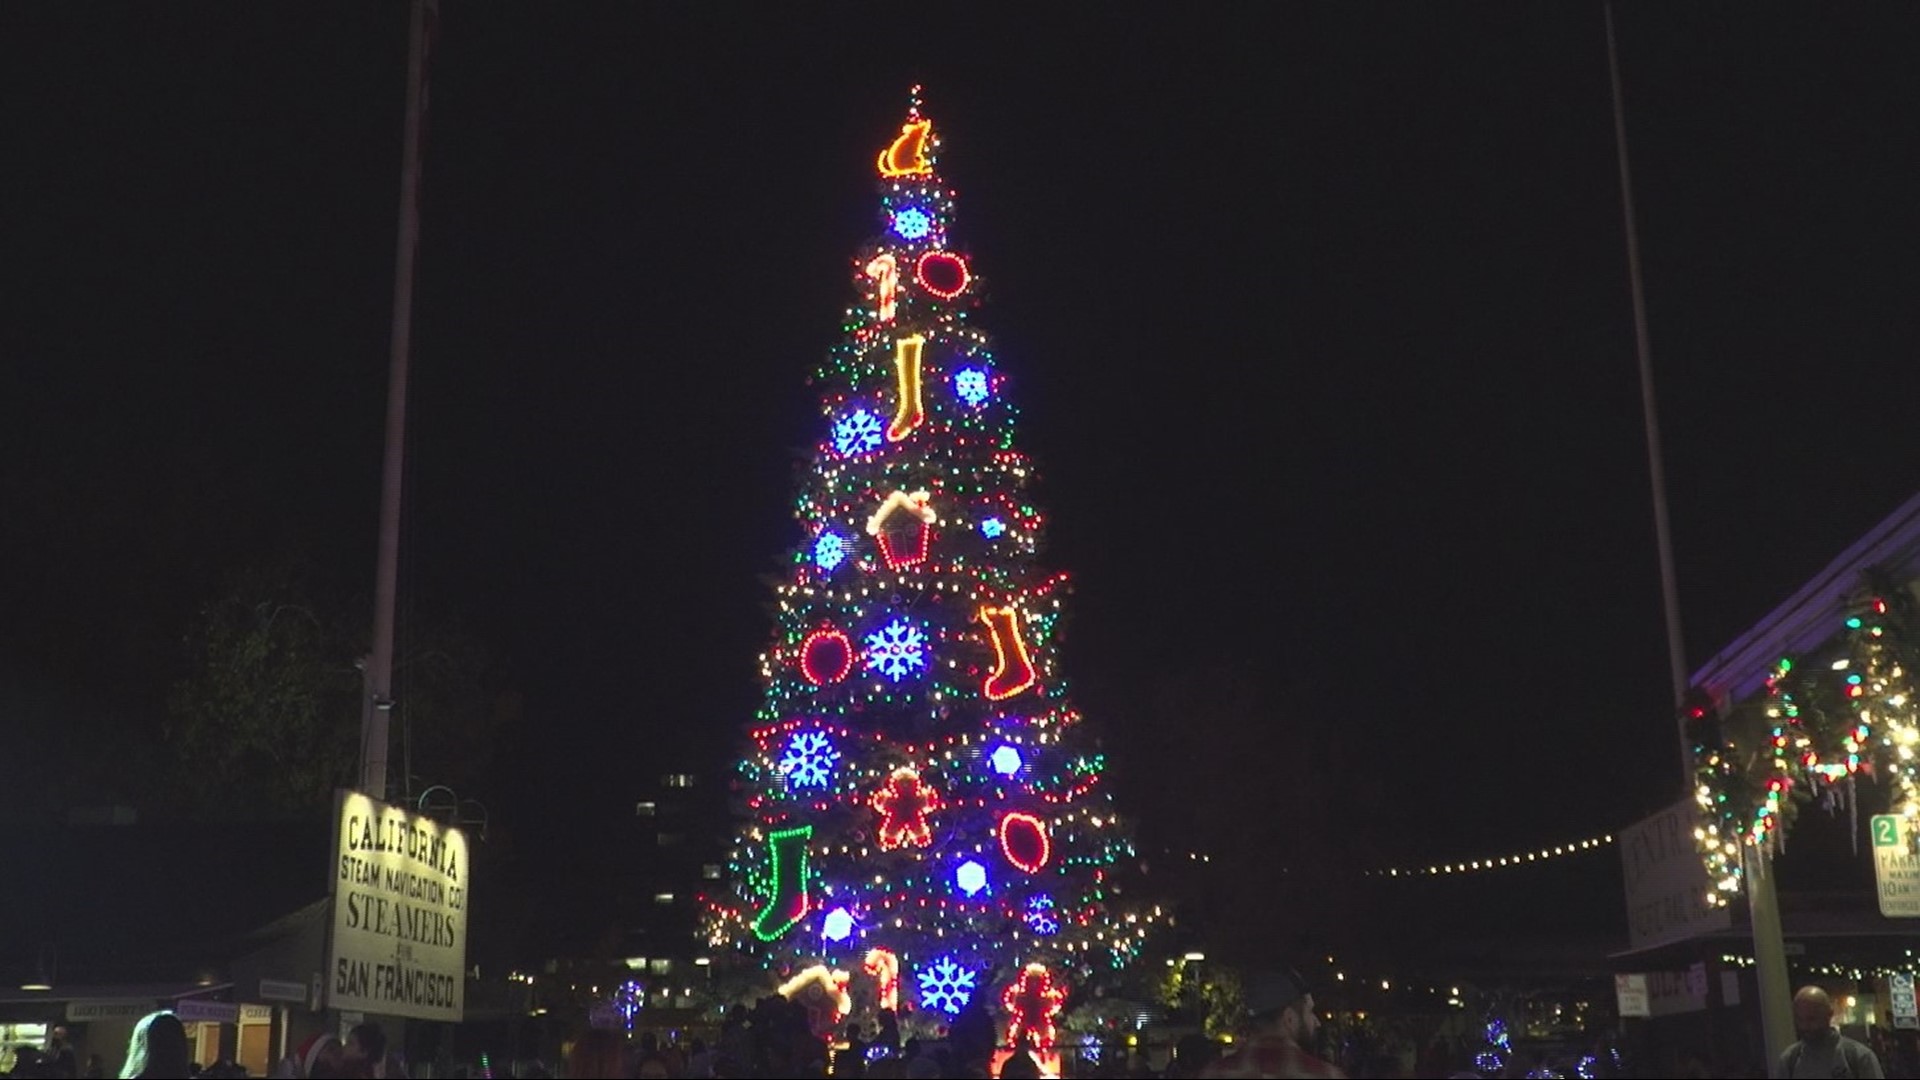 The tree lighting ceremony and first Theater of Lights performance of the year kicked off the holiday season Wednesday night.